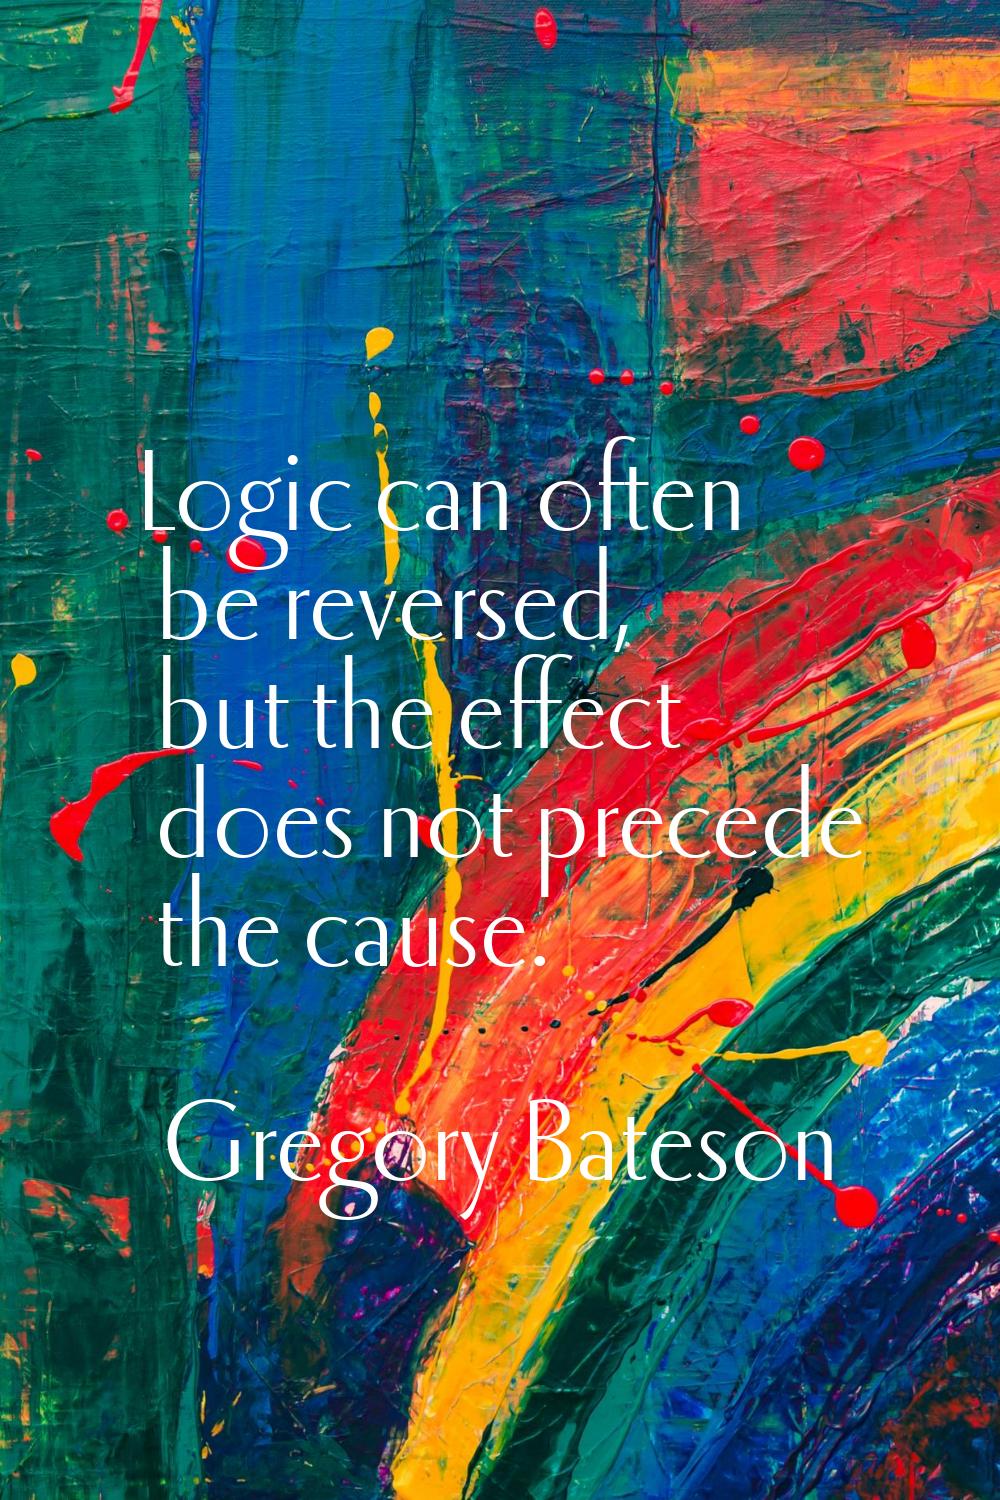 Logic can often be reversed, but the effect does not precede the cause.